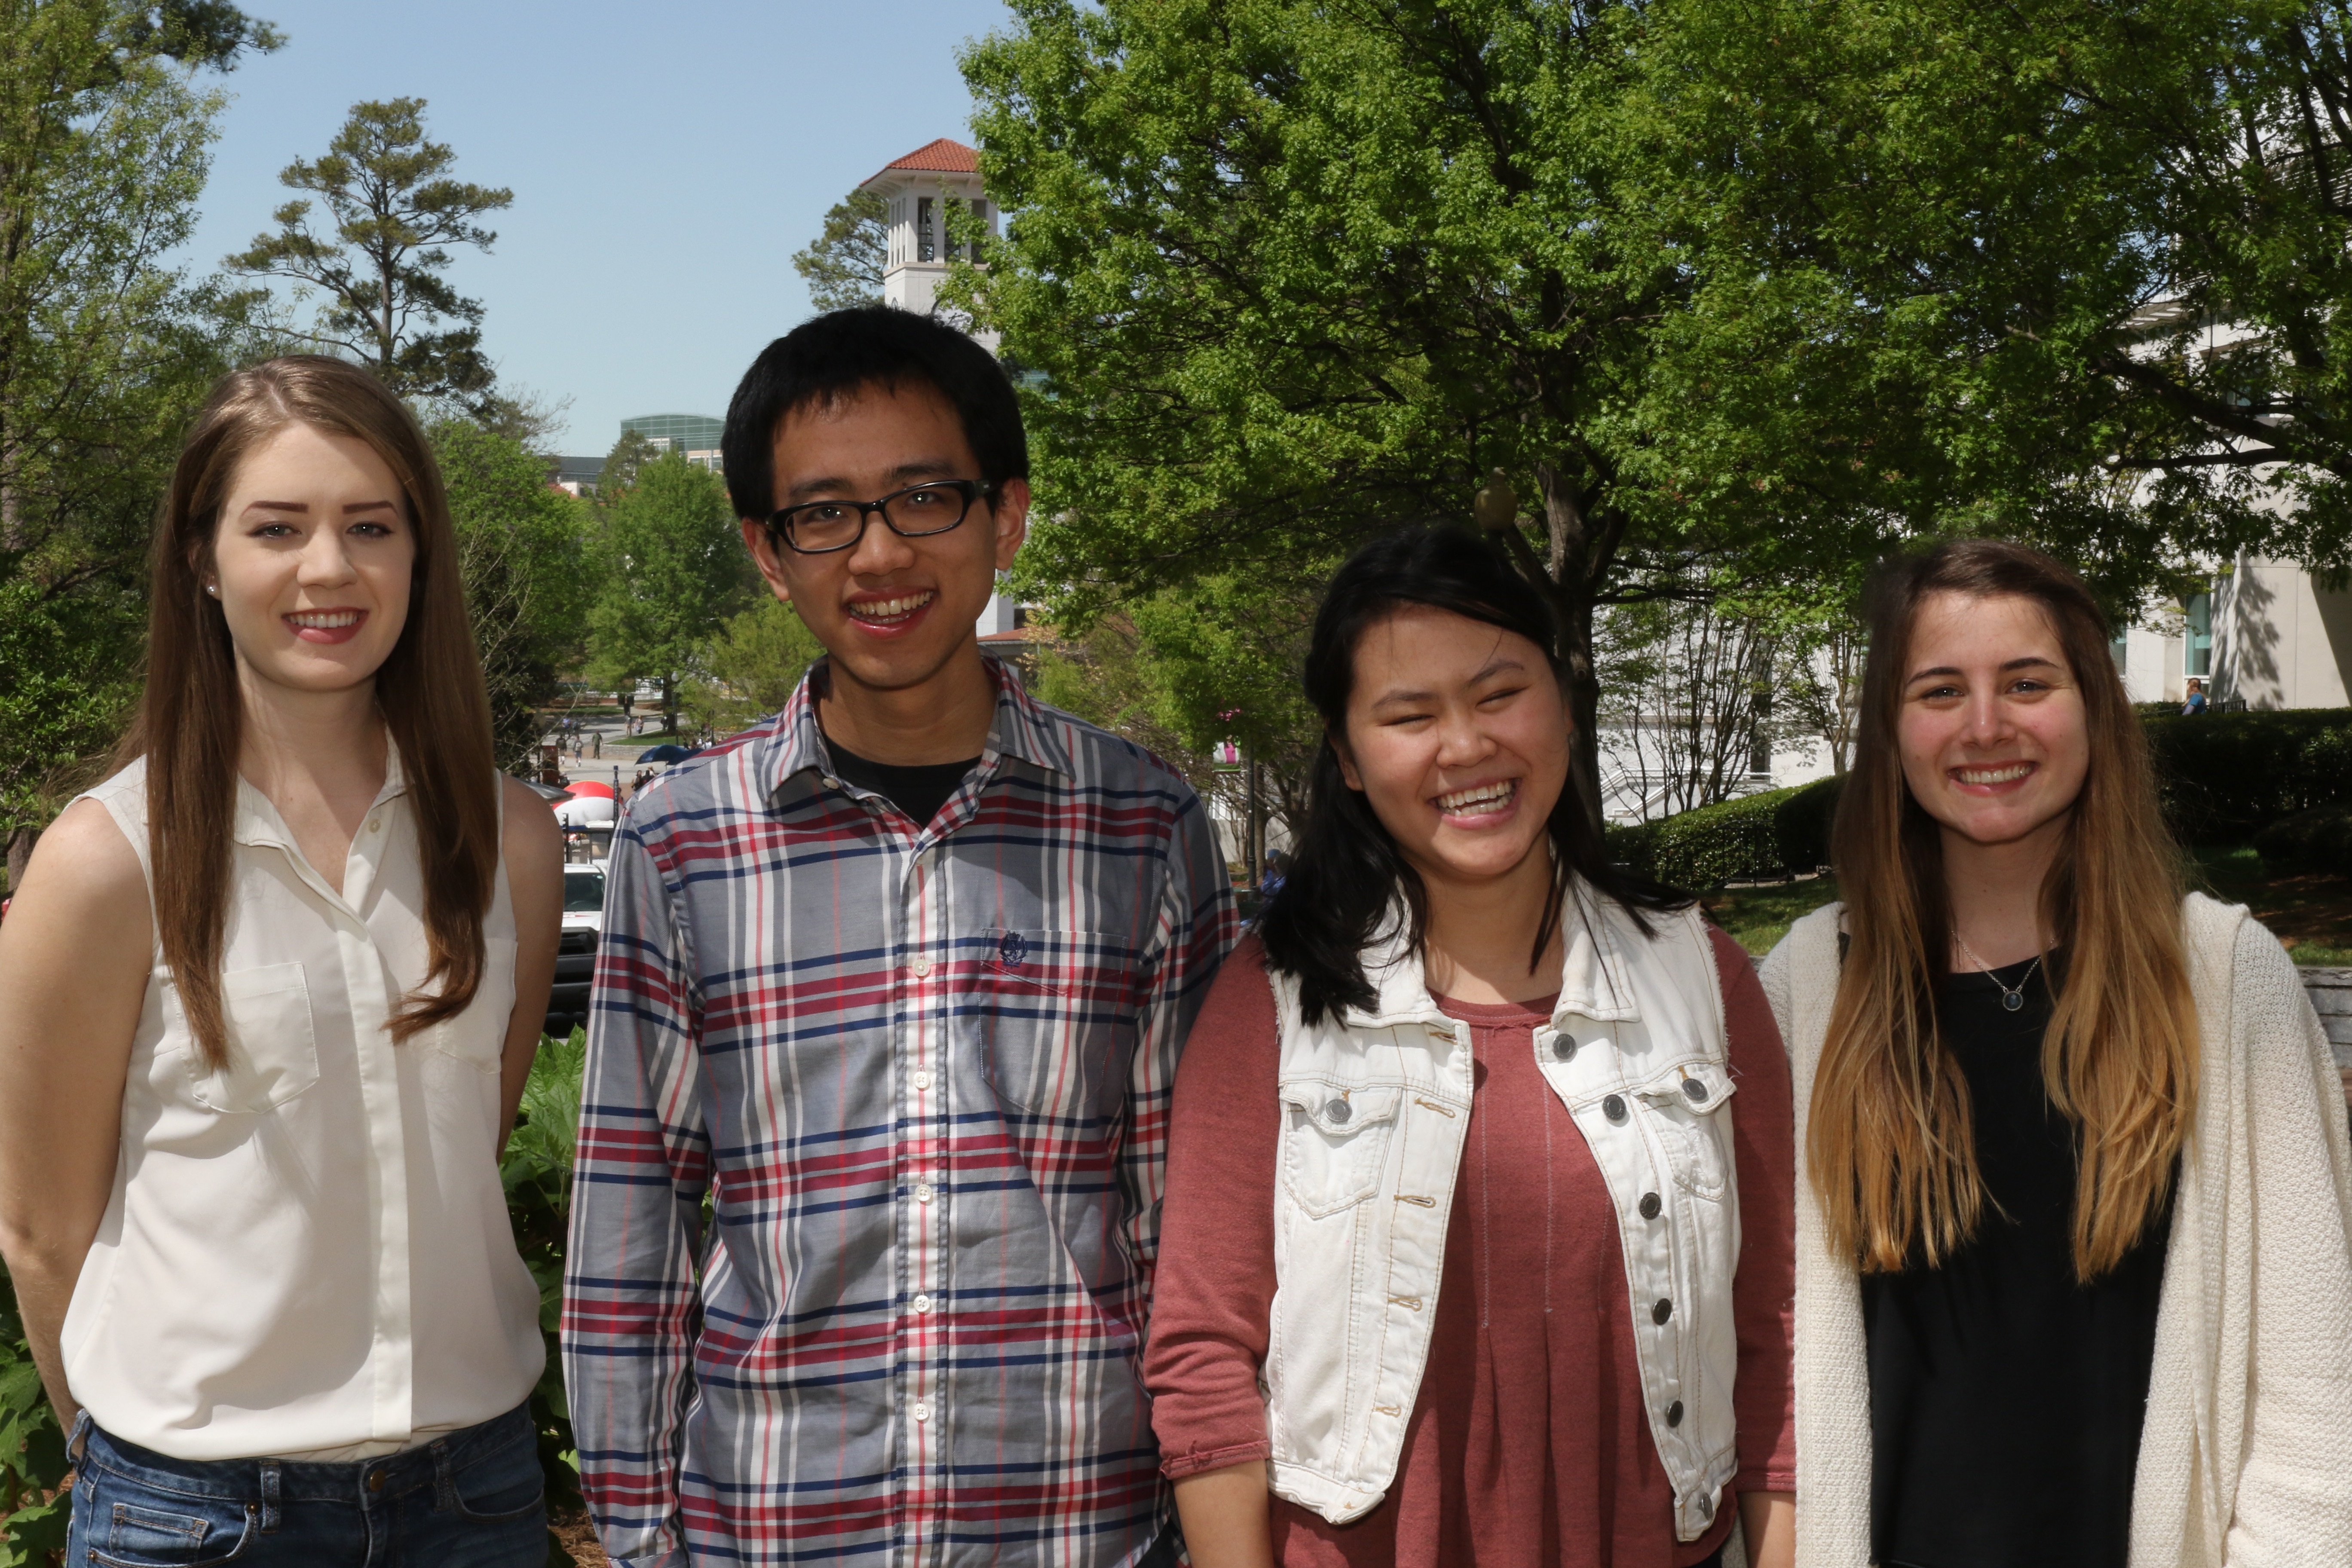 From left to right: Emily Moore, Zixuan (Armstrong) Li, Samantha Keng, & Hannah Conway